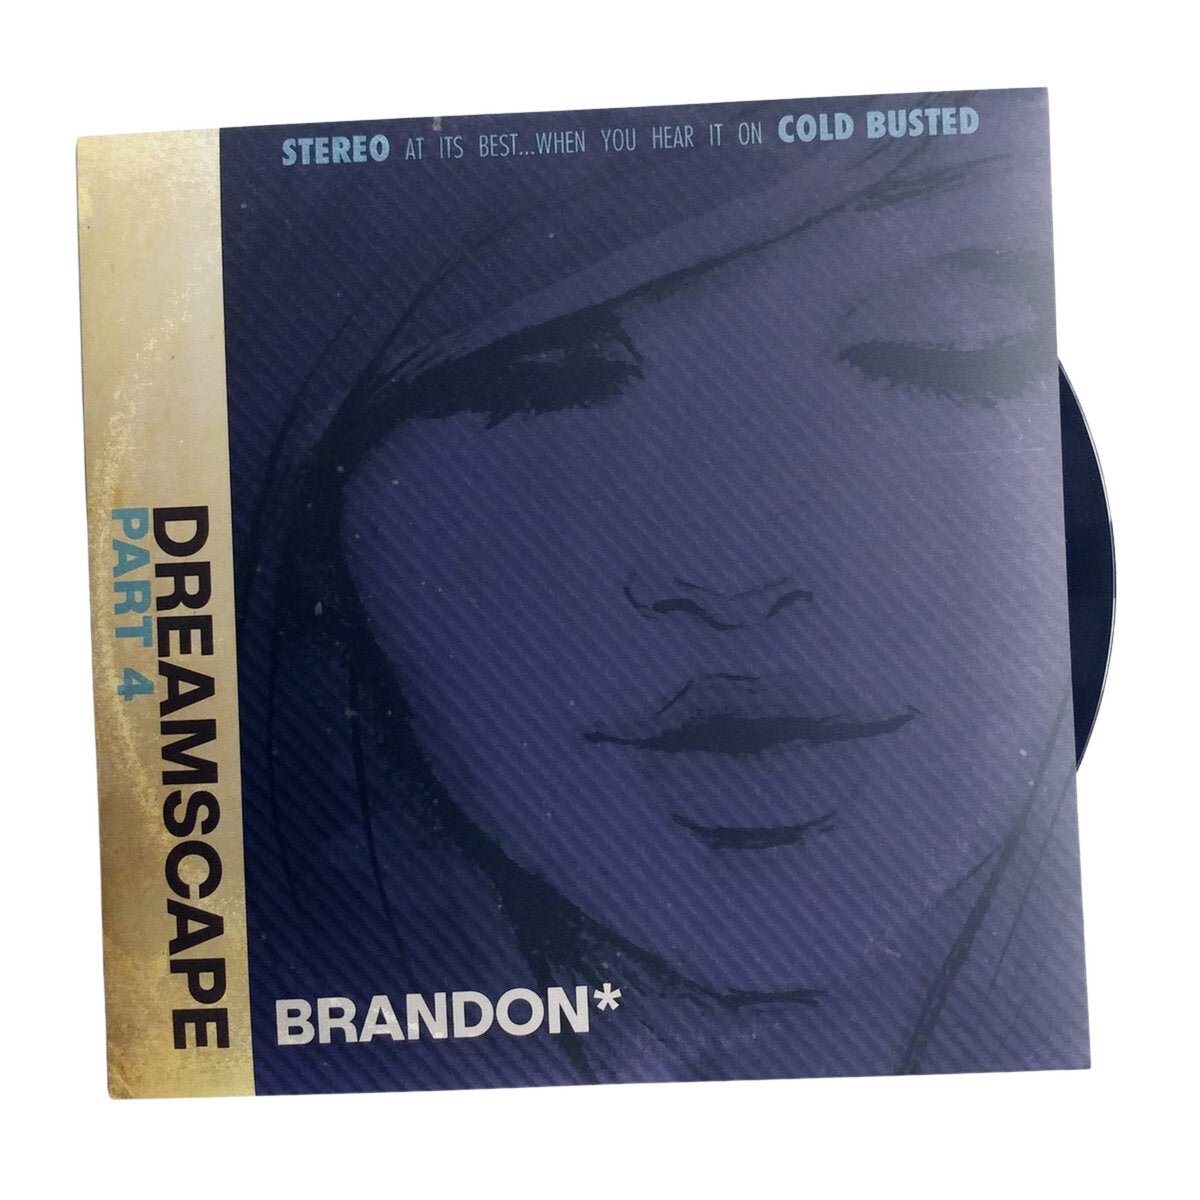 Brandon* - Dreamscape: Part 4 - Limited Edition 12 Inch Vinyl - Cold Busted